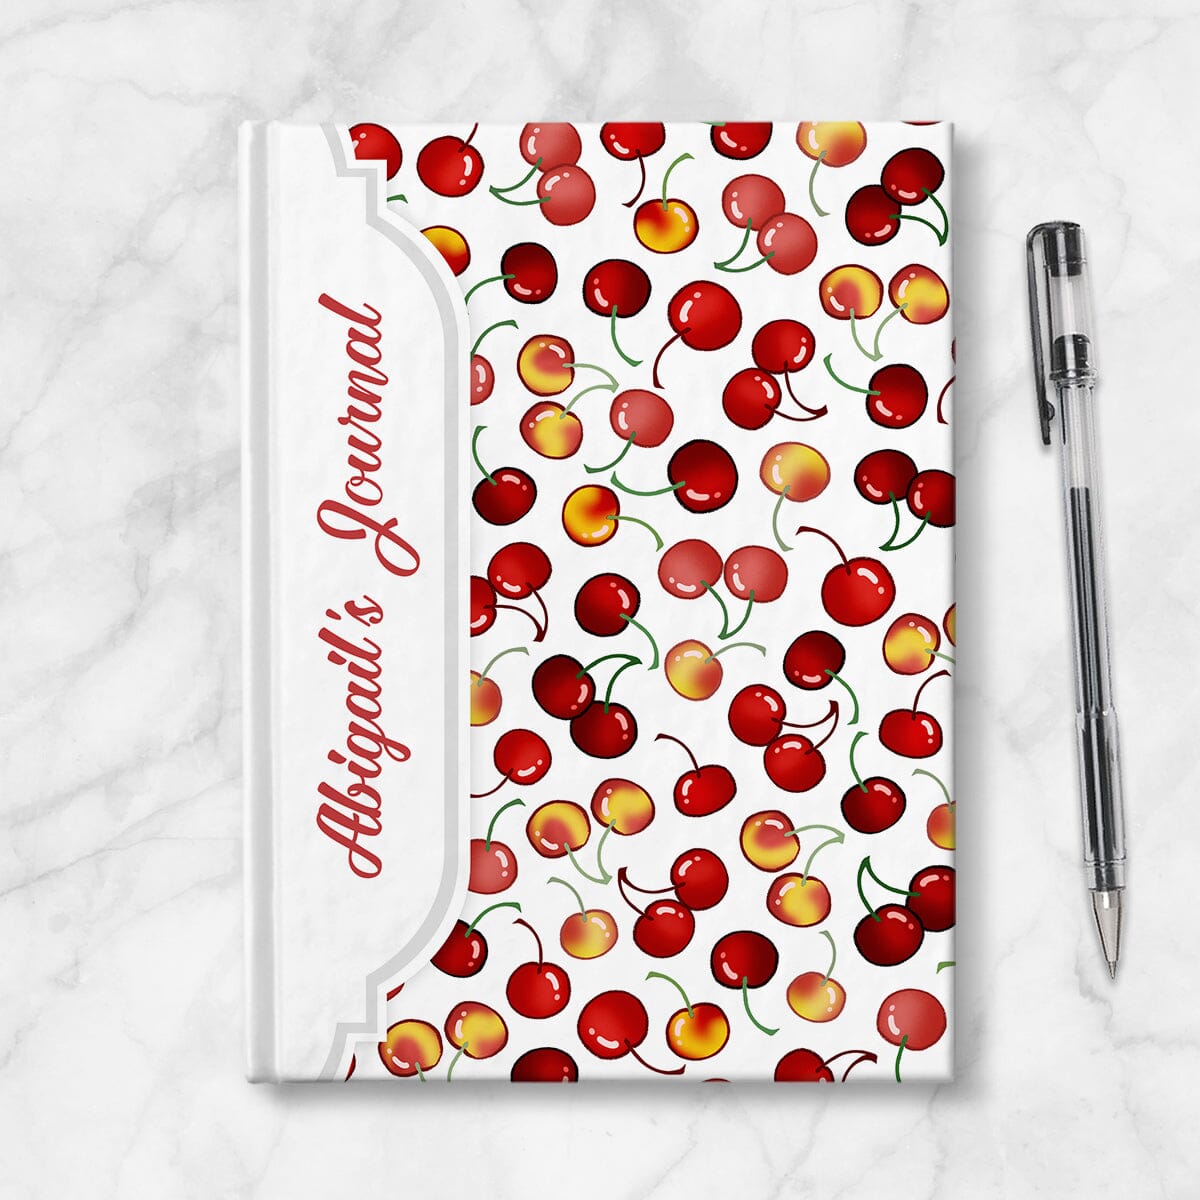 Personalized Cherries Journal at Artistically Invited. Image shows the book on a countertop next to a pen.